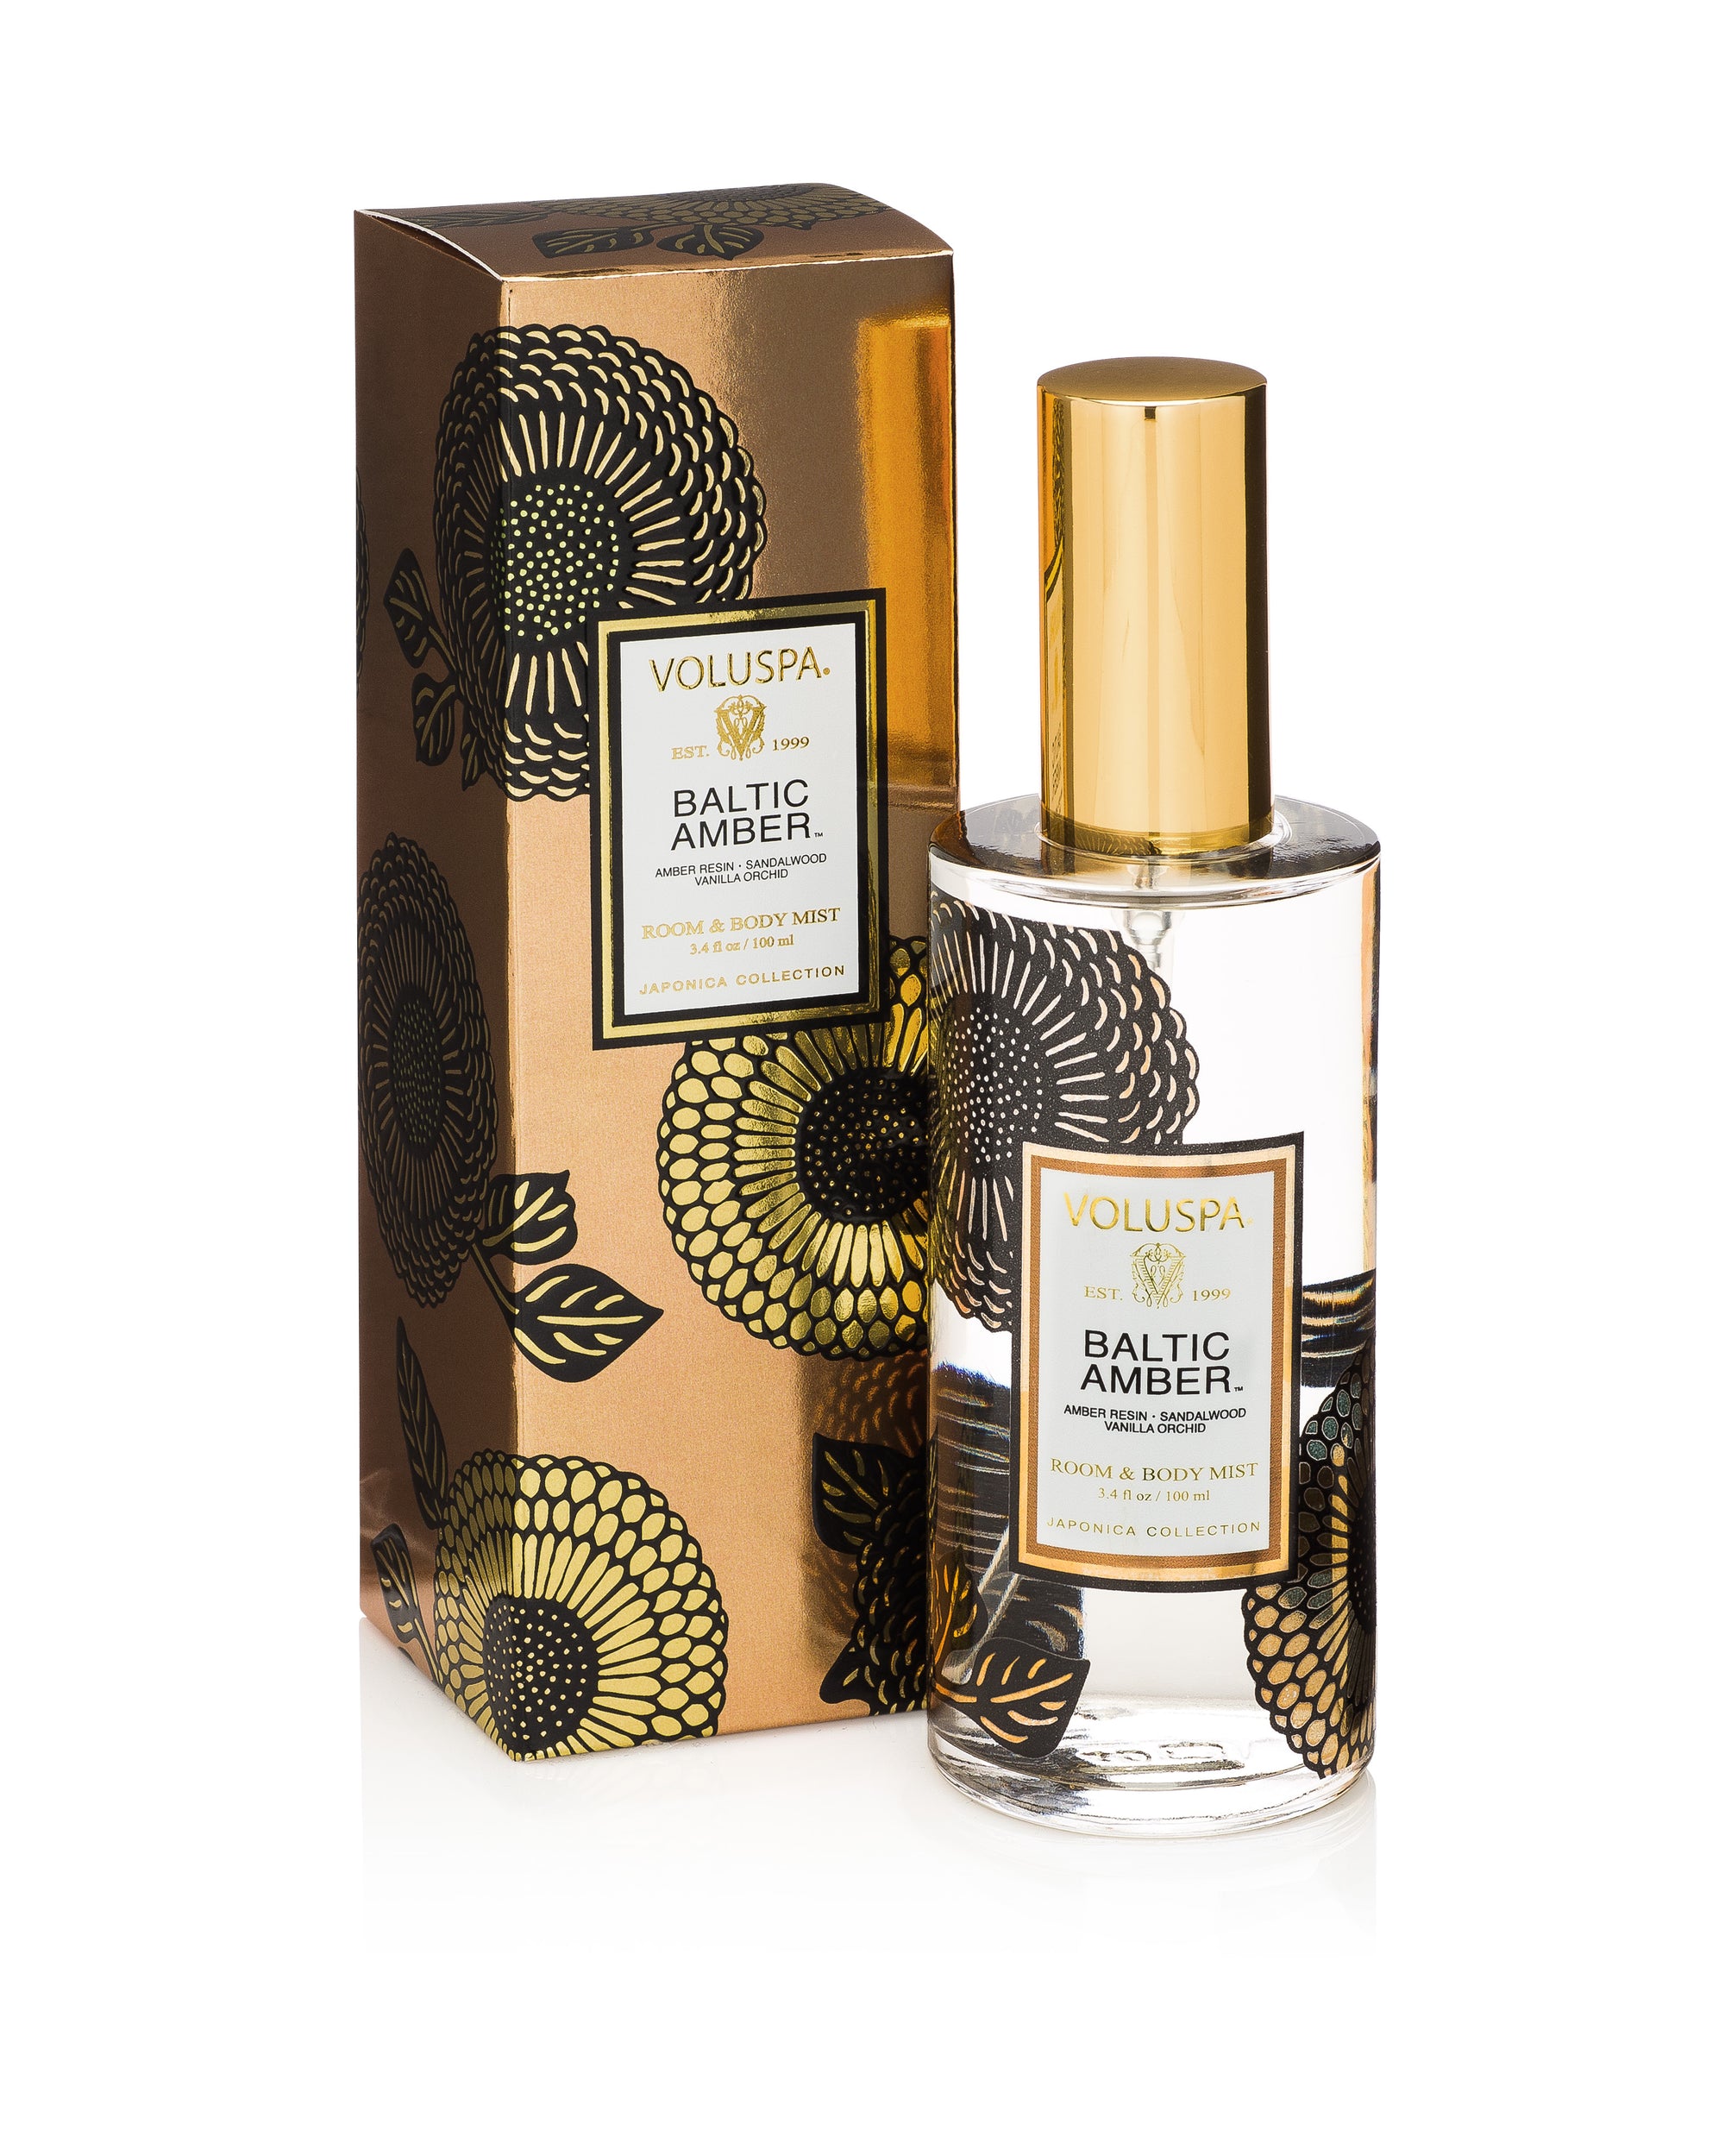 Japonica Limited Baltic Amber Room and Body Mist